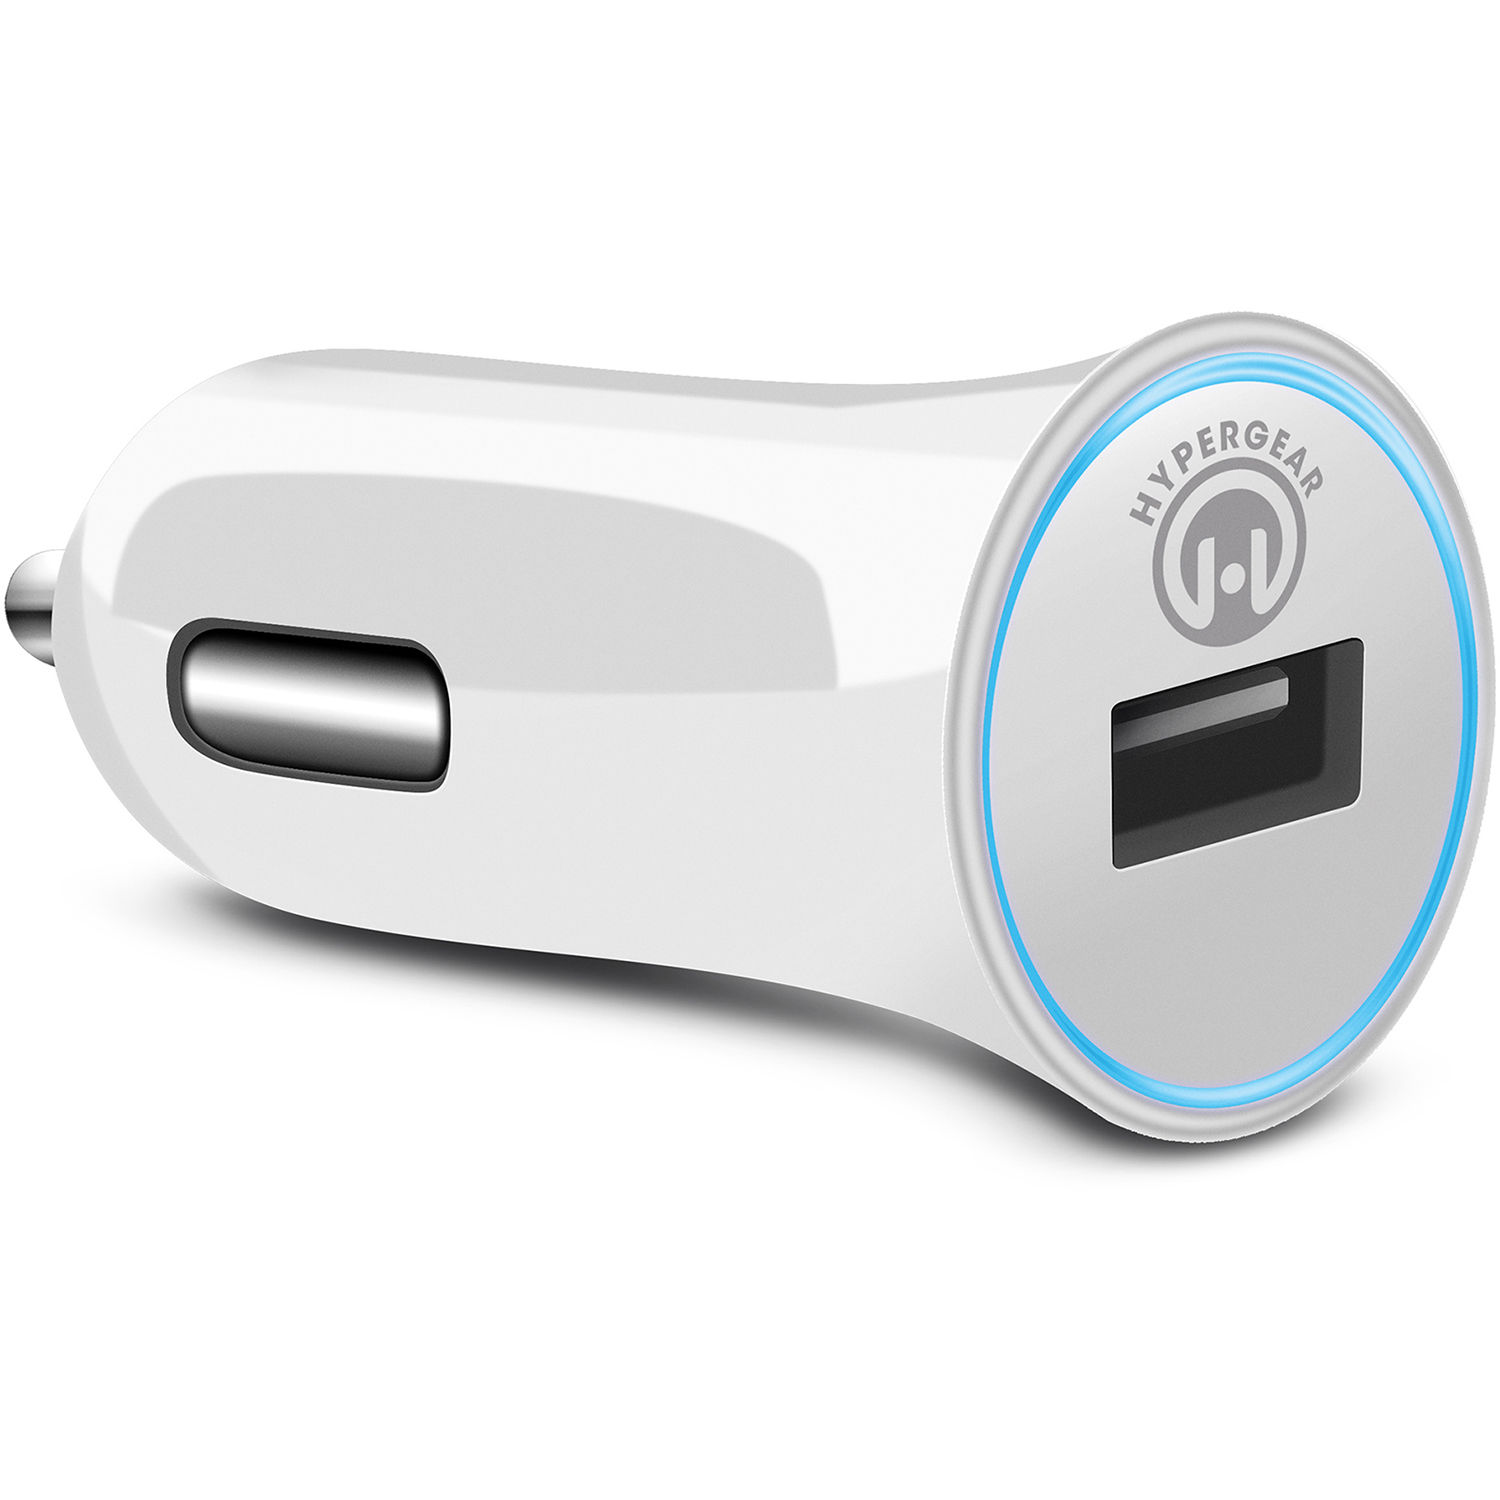 rapid car charger